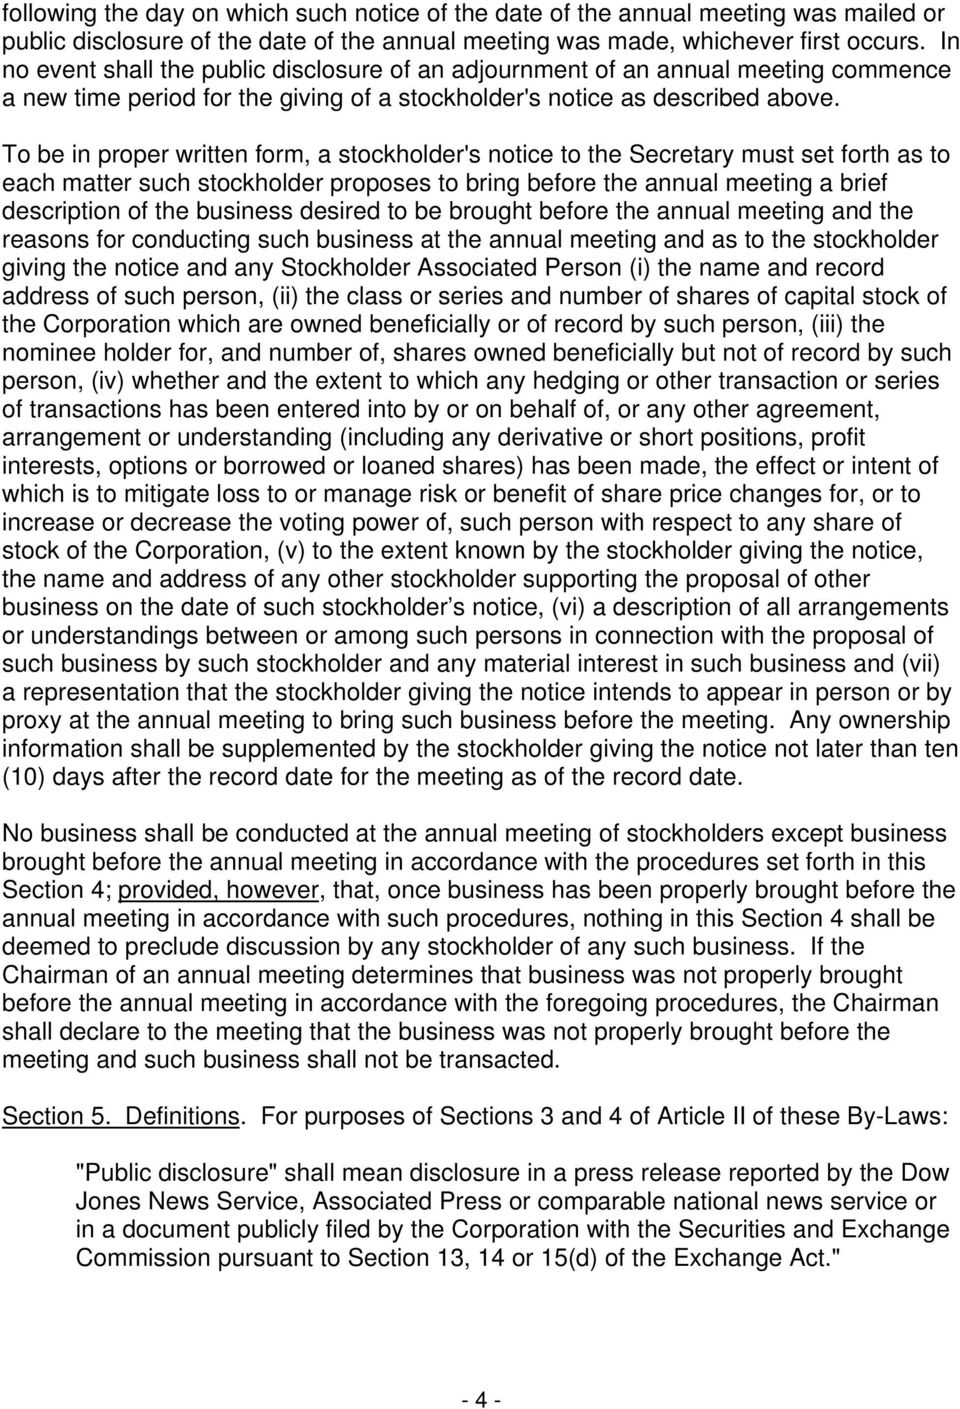 To be in proper written form, a stockholder's notice to the Secretary must set forth as to each matter such stockholder proposes to bring before the annual meeting a brief description of the business